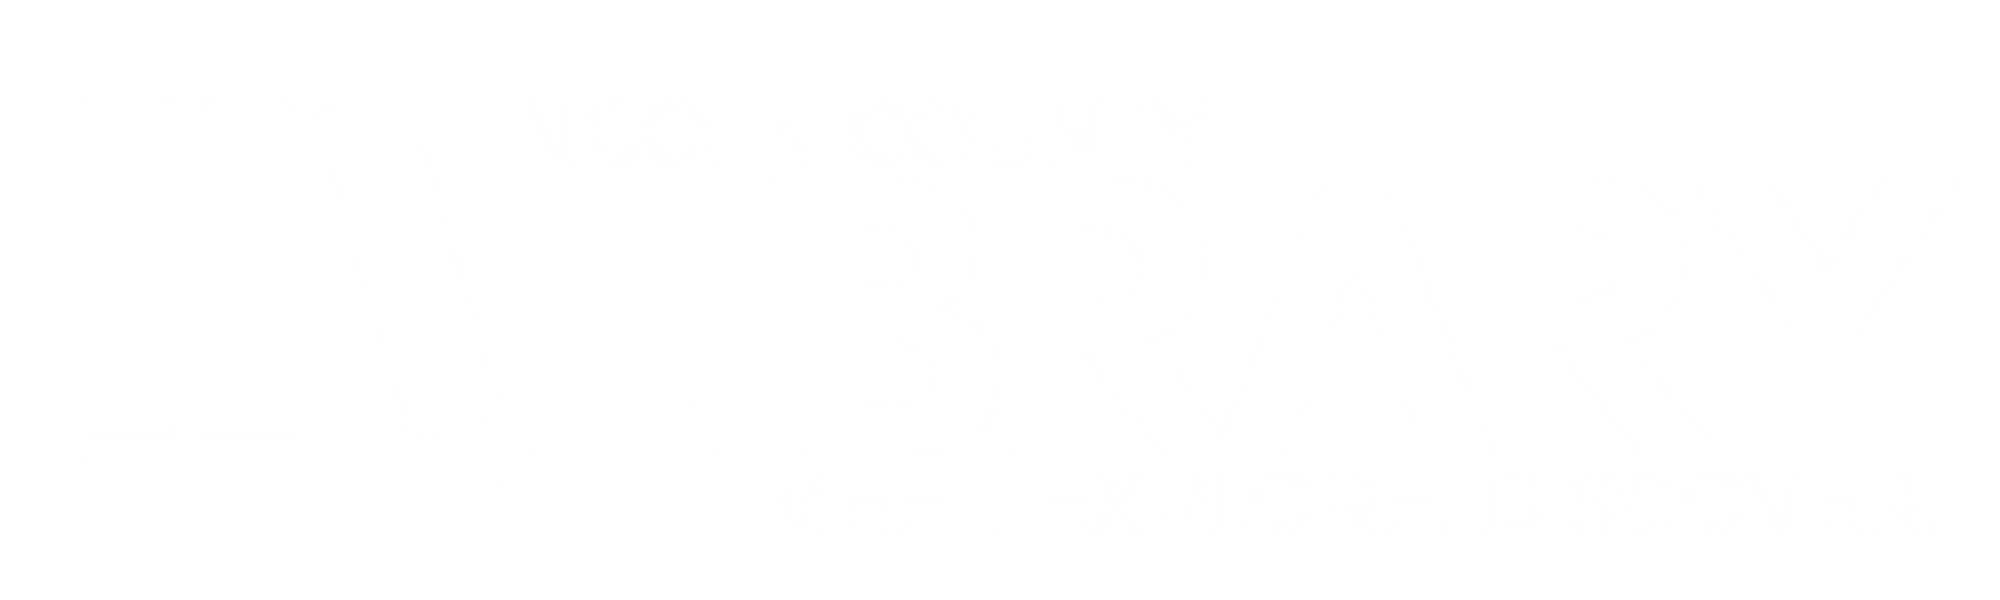 Lincoln County Library